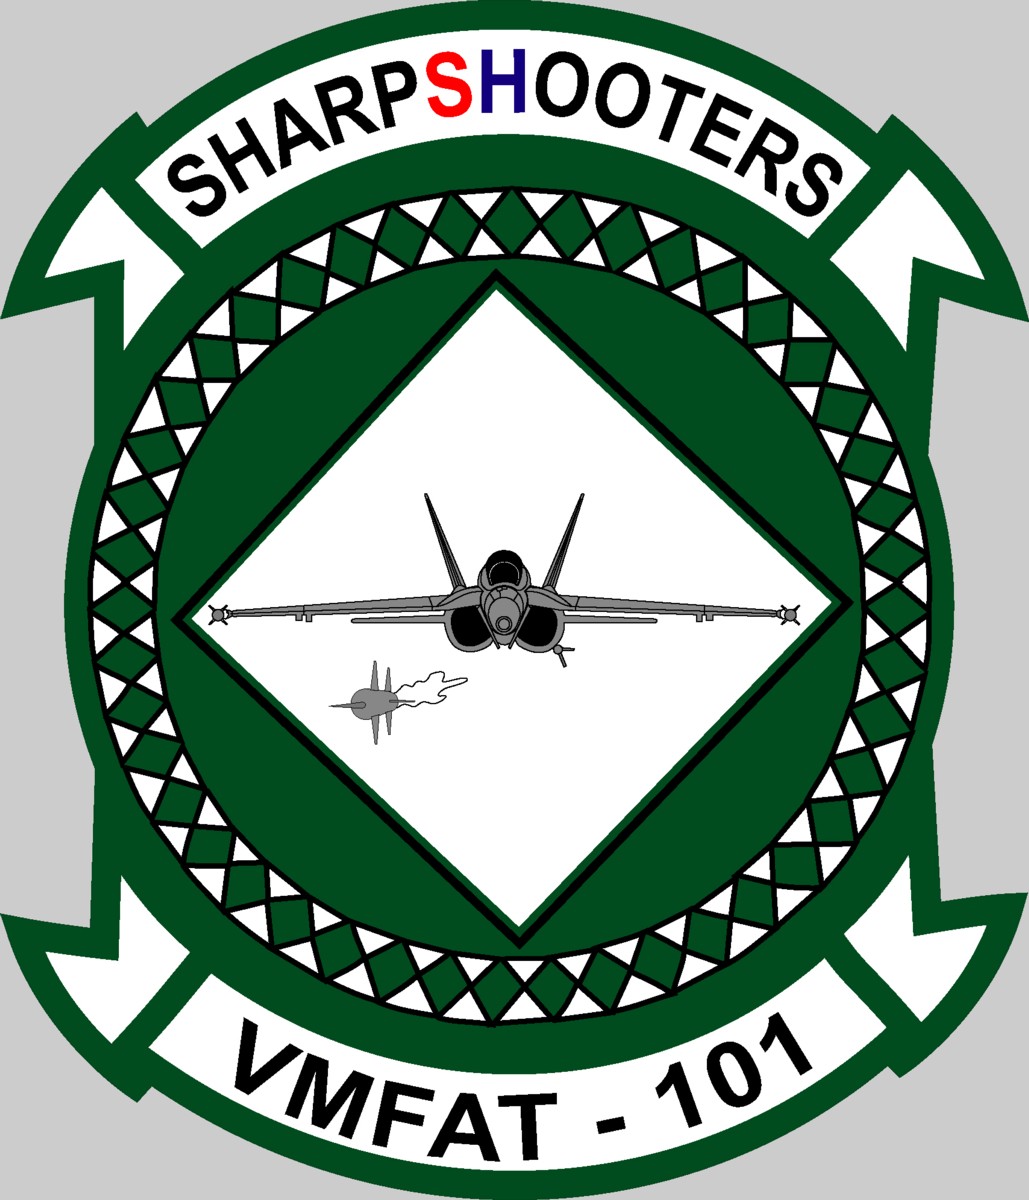 vmfat-101 sharpshooters insignia crest patch badge marine fighter attack training squadron usmc 02x